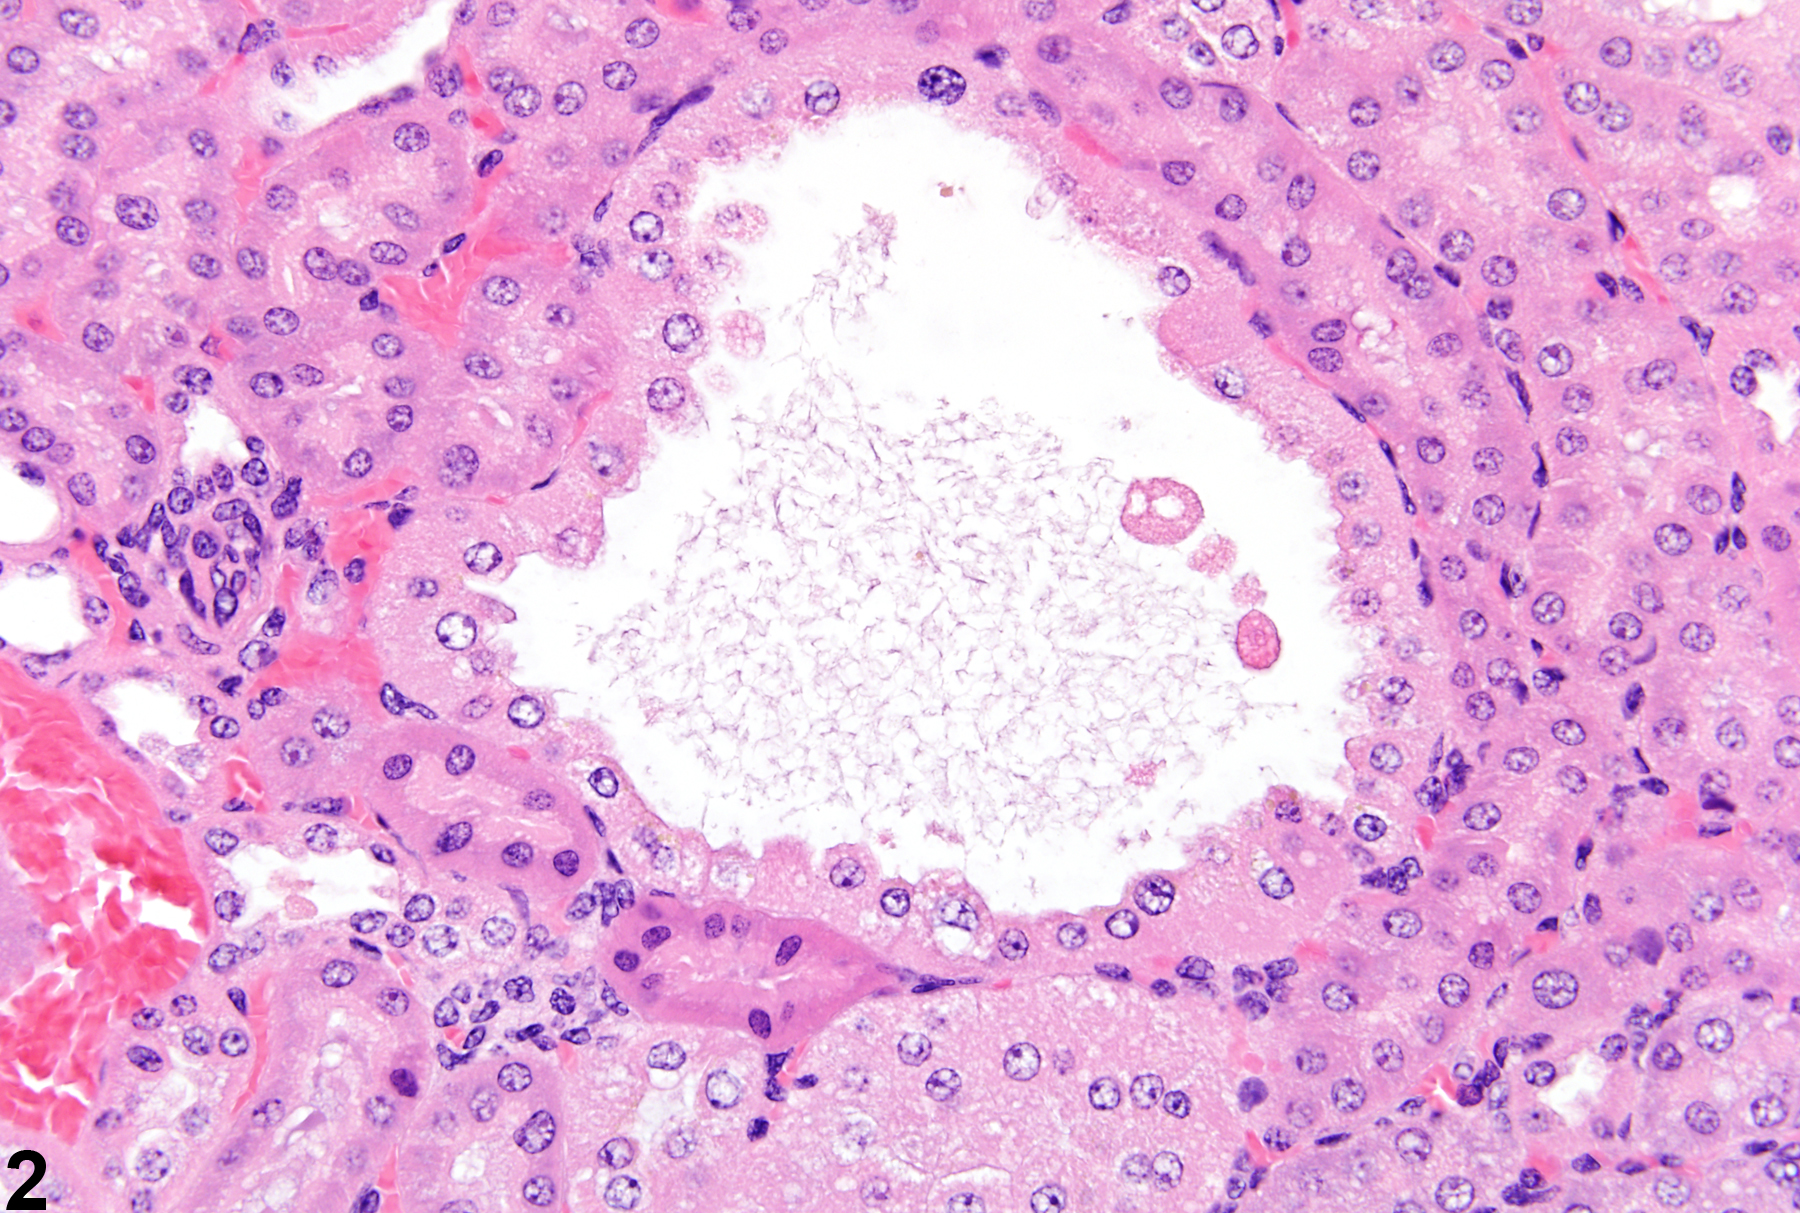 Image of cyst in the kidney from a male Tg.Ac (FVB/N) hemizygous mouse in a subchronic study